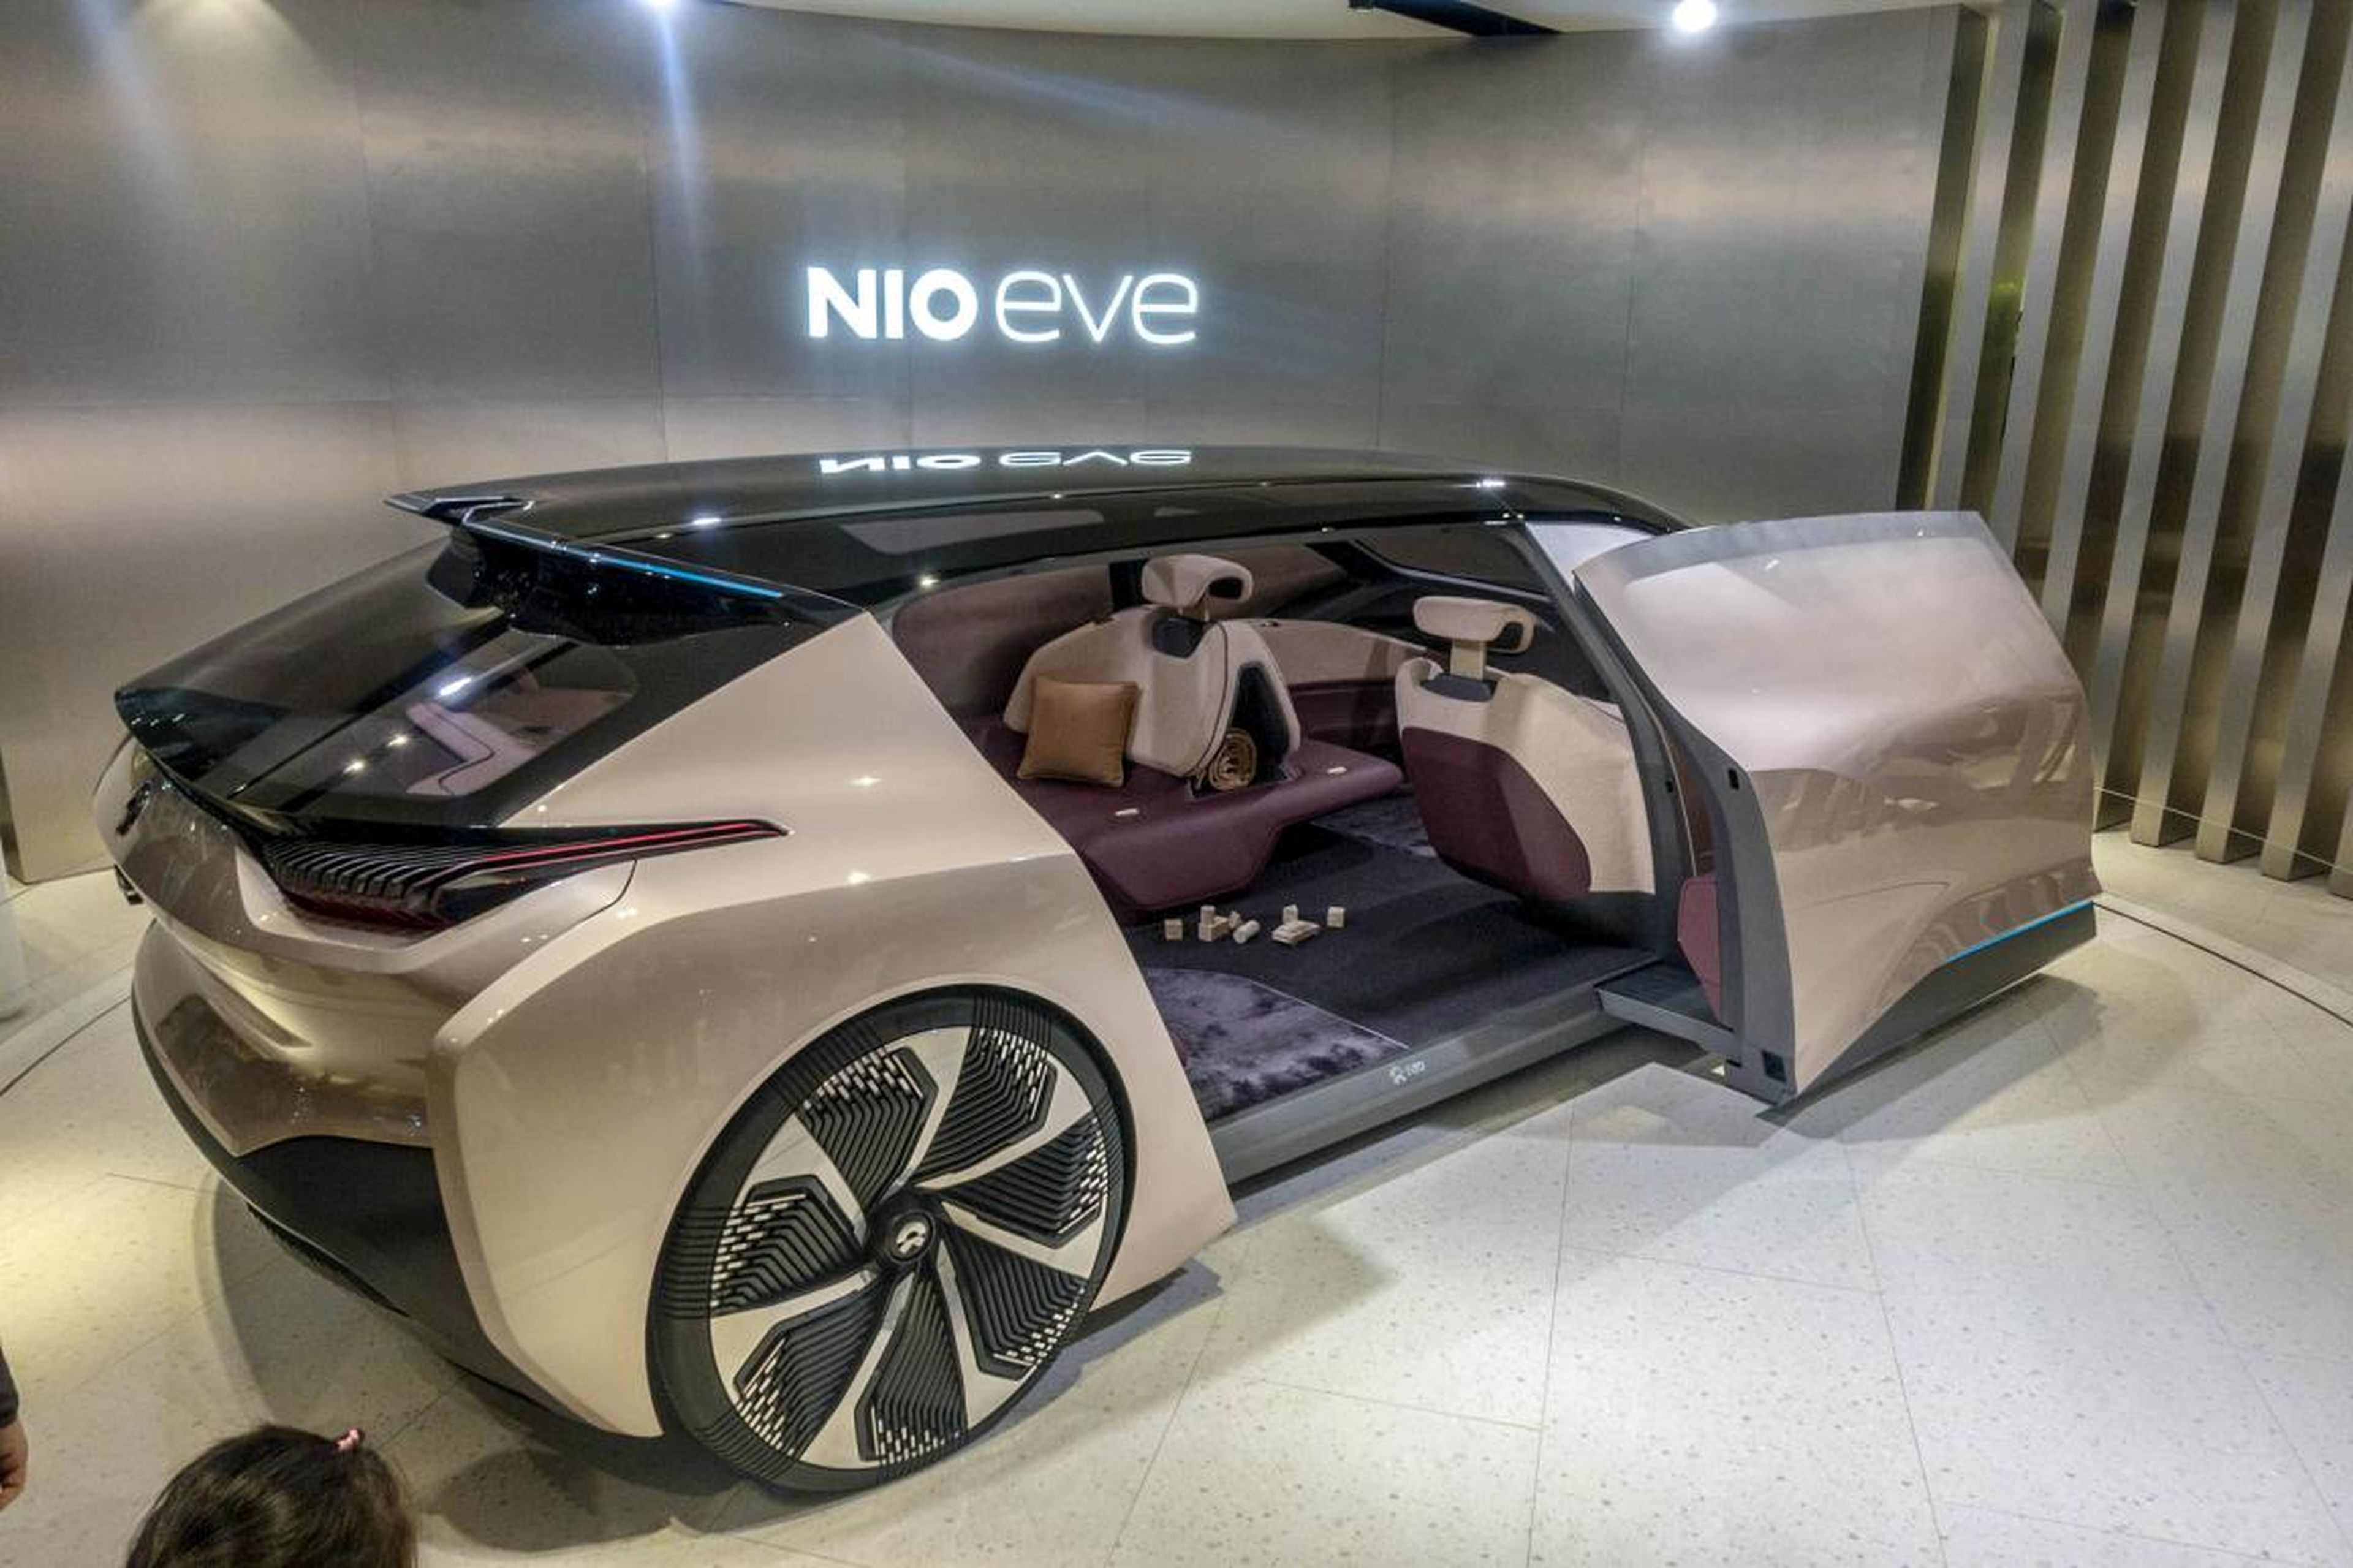 Chinese Tesla rival Nio is crashing after slashing its delivery outlook and calling off plans for a Shanghai factory